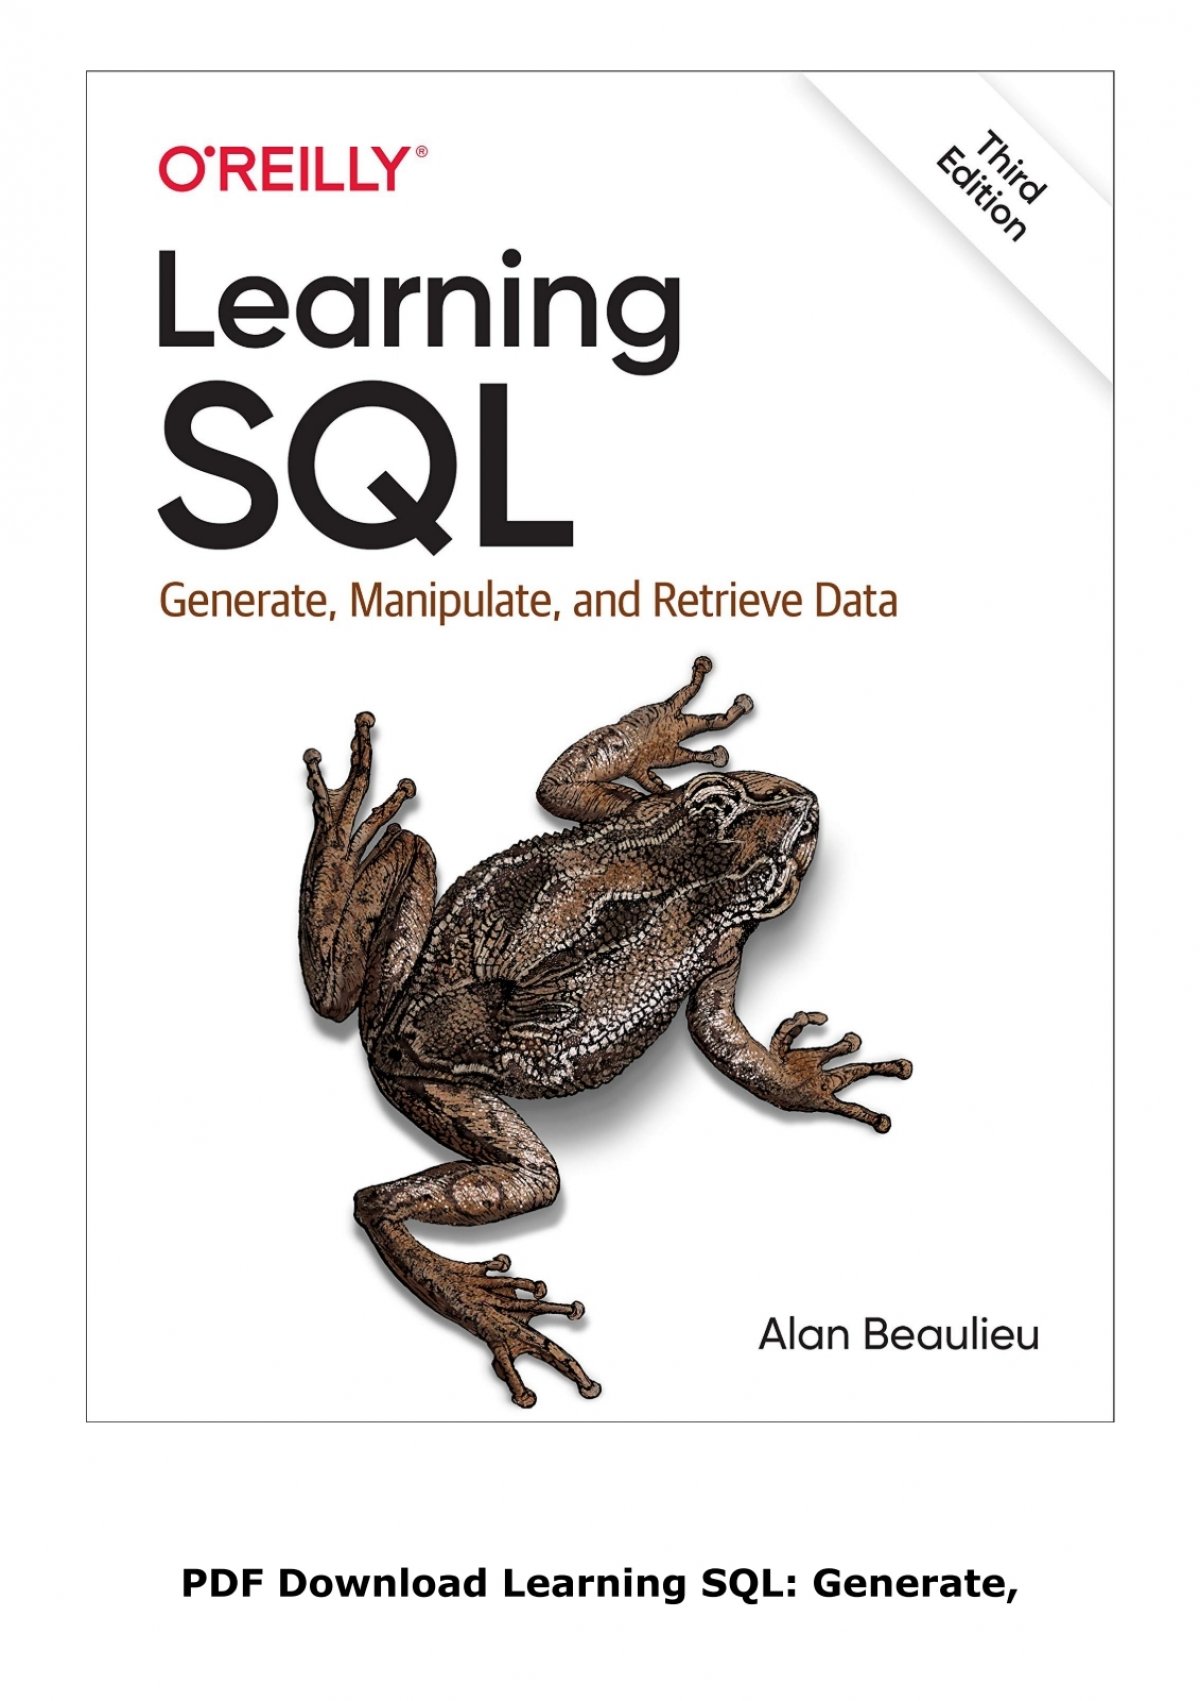 PDF Download Learning SQL: Generate, Manipulate, and Retrieve Data Full